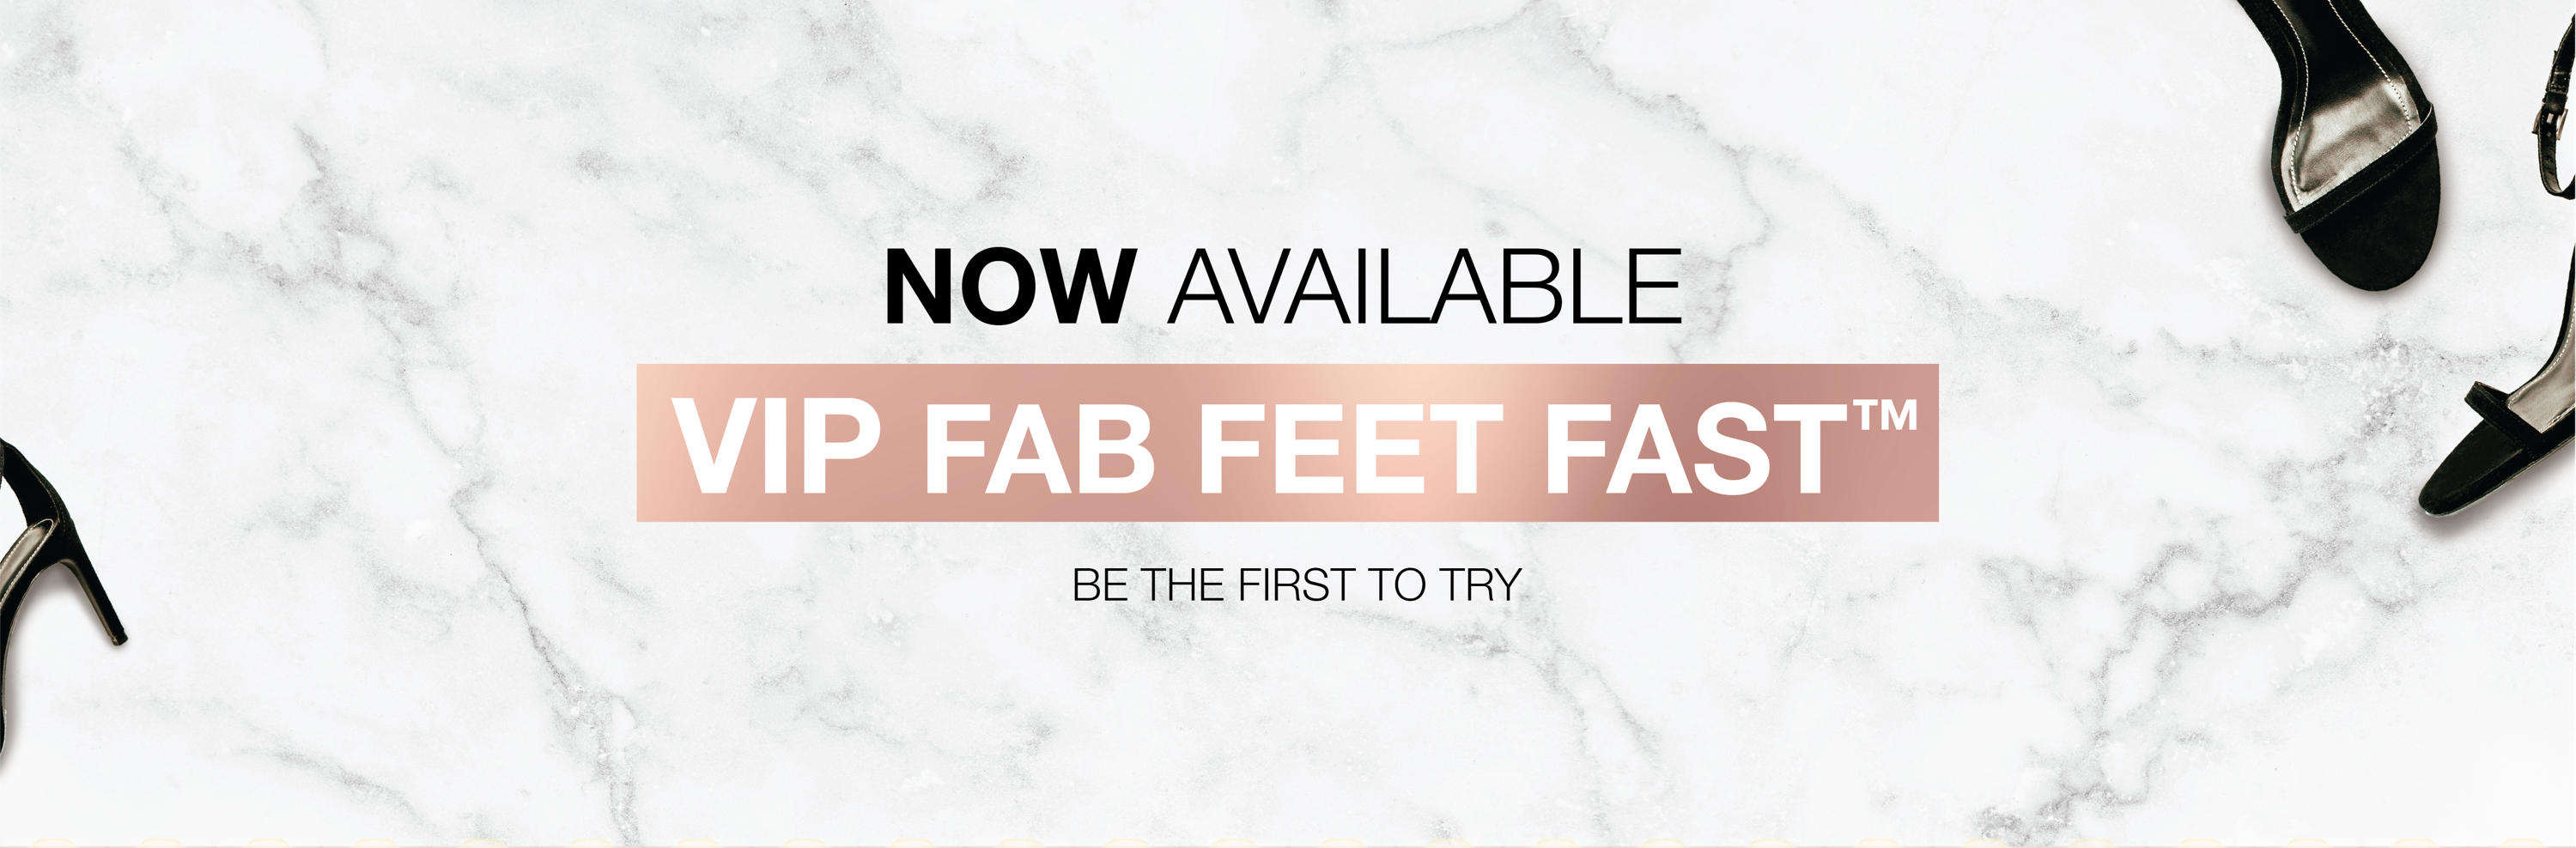 Now available, VIP FAB FEET FAST. Be the first to try